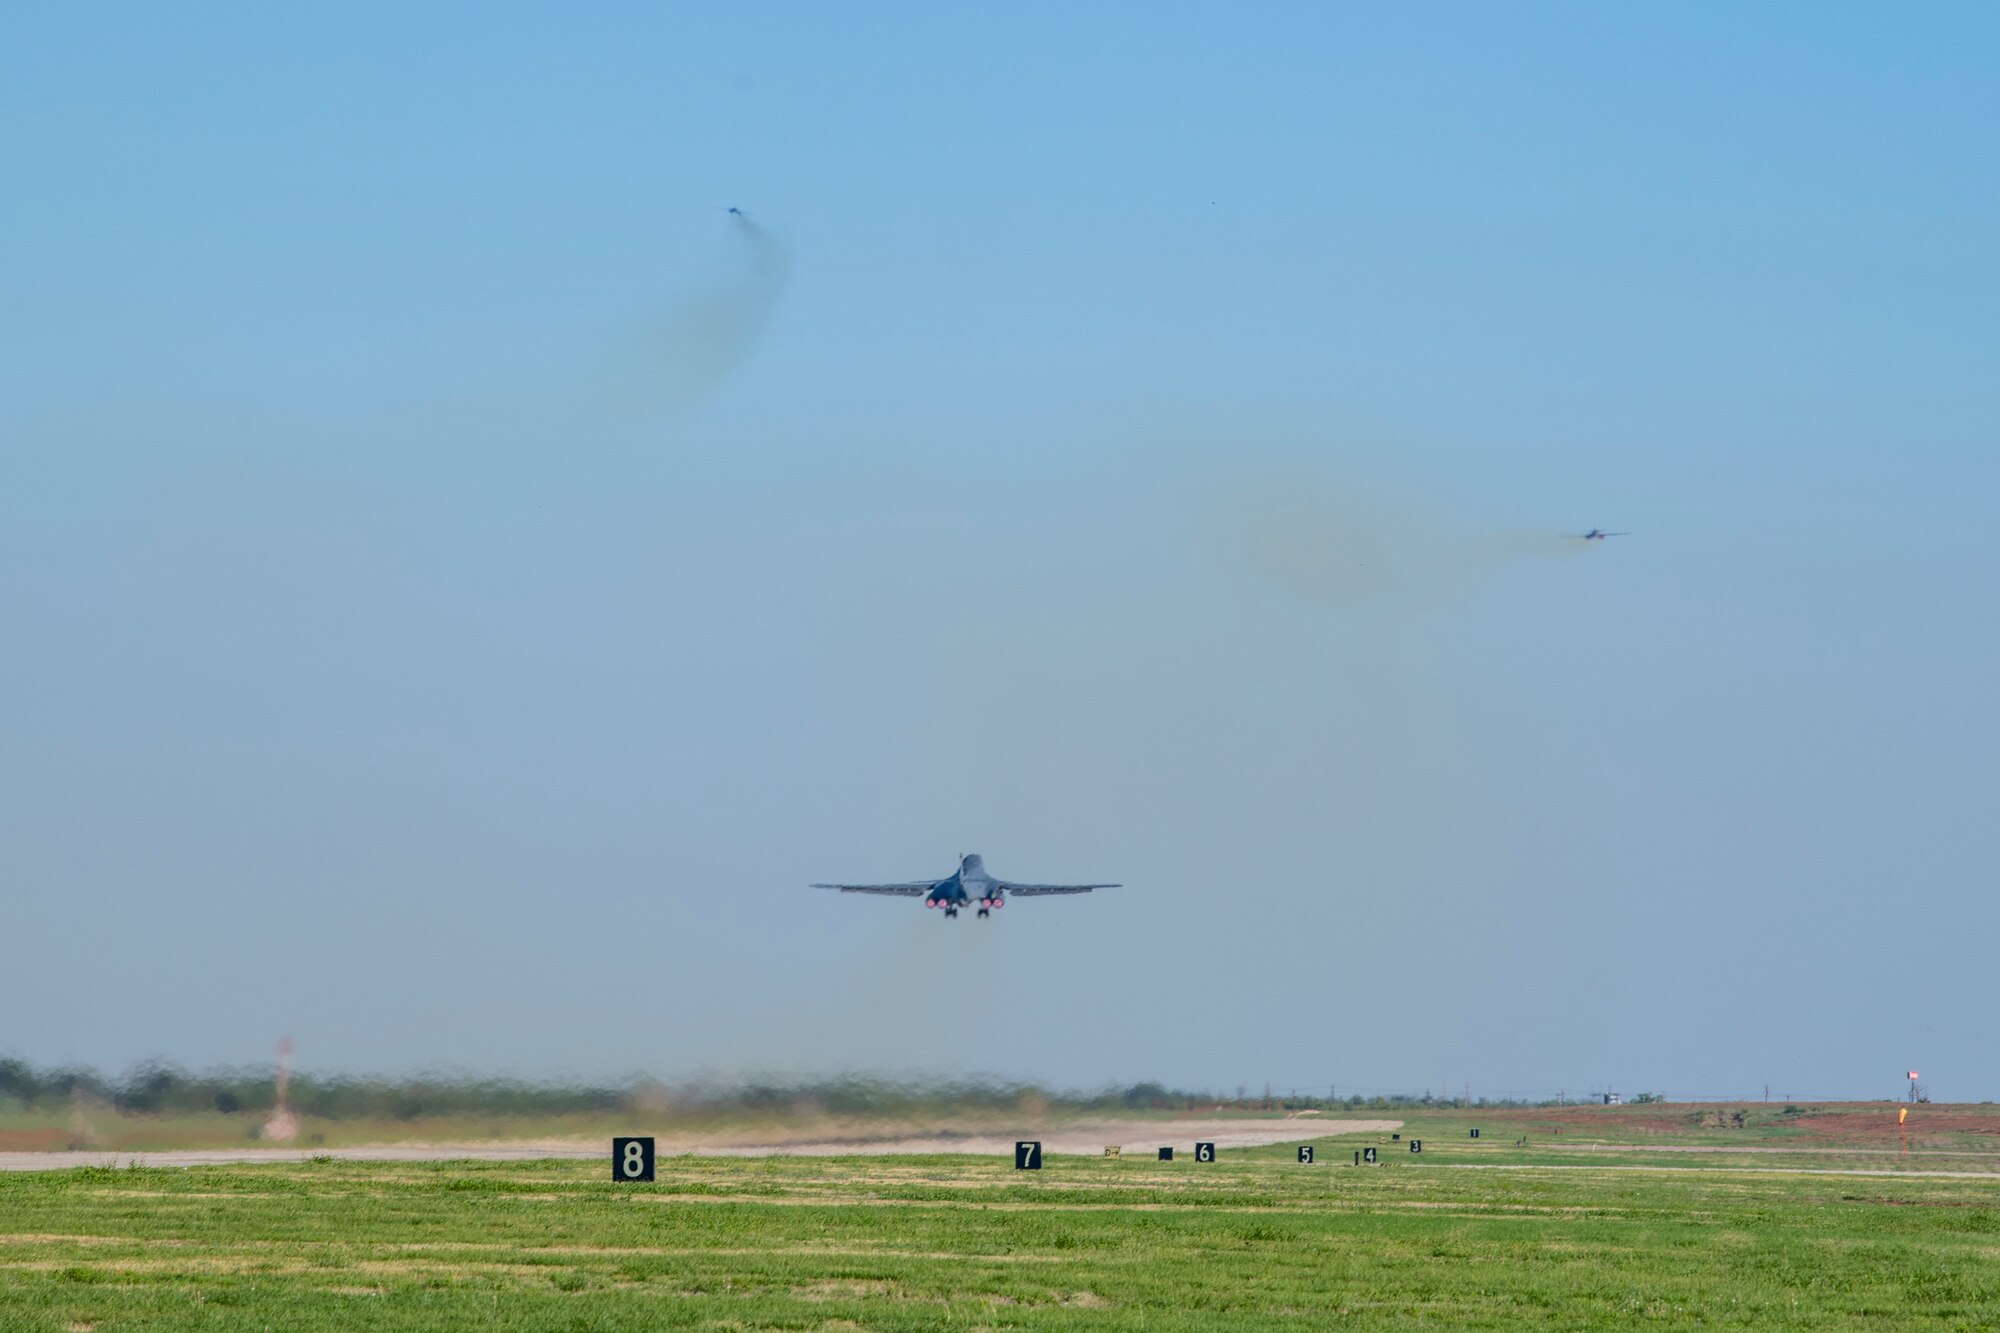 Three B-1B Lancers takeoff from Dyess Air Force Base, Texas Sept. 7th, 2022 for a Bomber Task Force mission to U.S. Southern Command. BTF missions familiarize aircrews with air bases and operations in different Geographic Combatant Commands and enable them to maintain a high state of readiness and proficiency, validating the U.S. Air Force Global Strike Command’s always-ready global strike capability. (U.S. Air Force photo by Senior Airman Mercedes Porter)